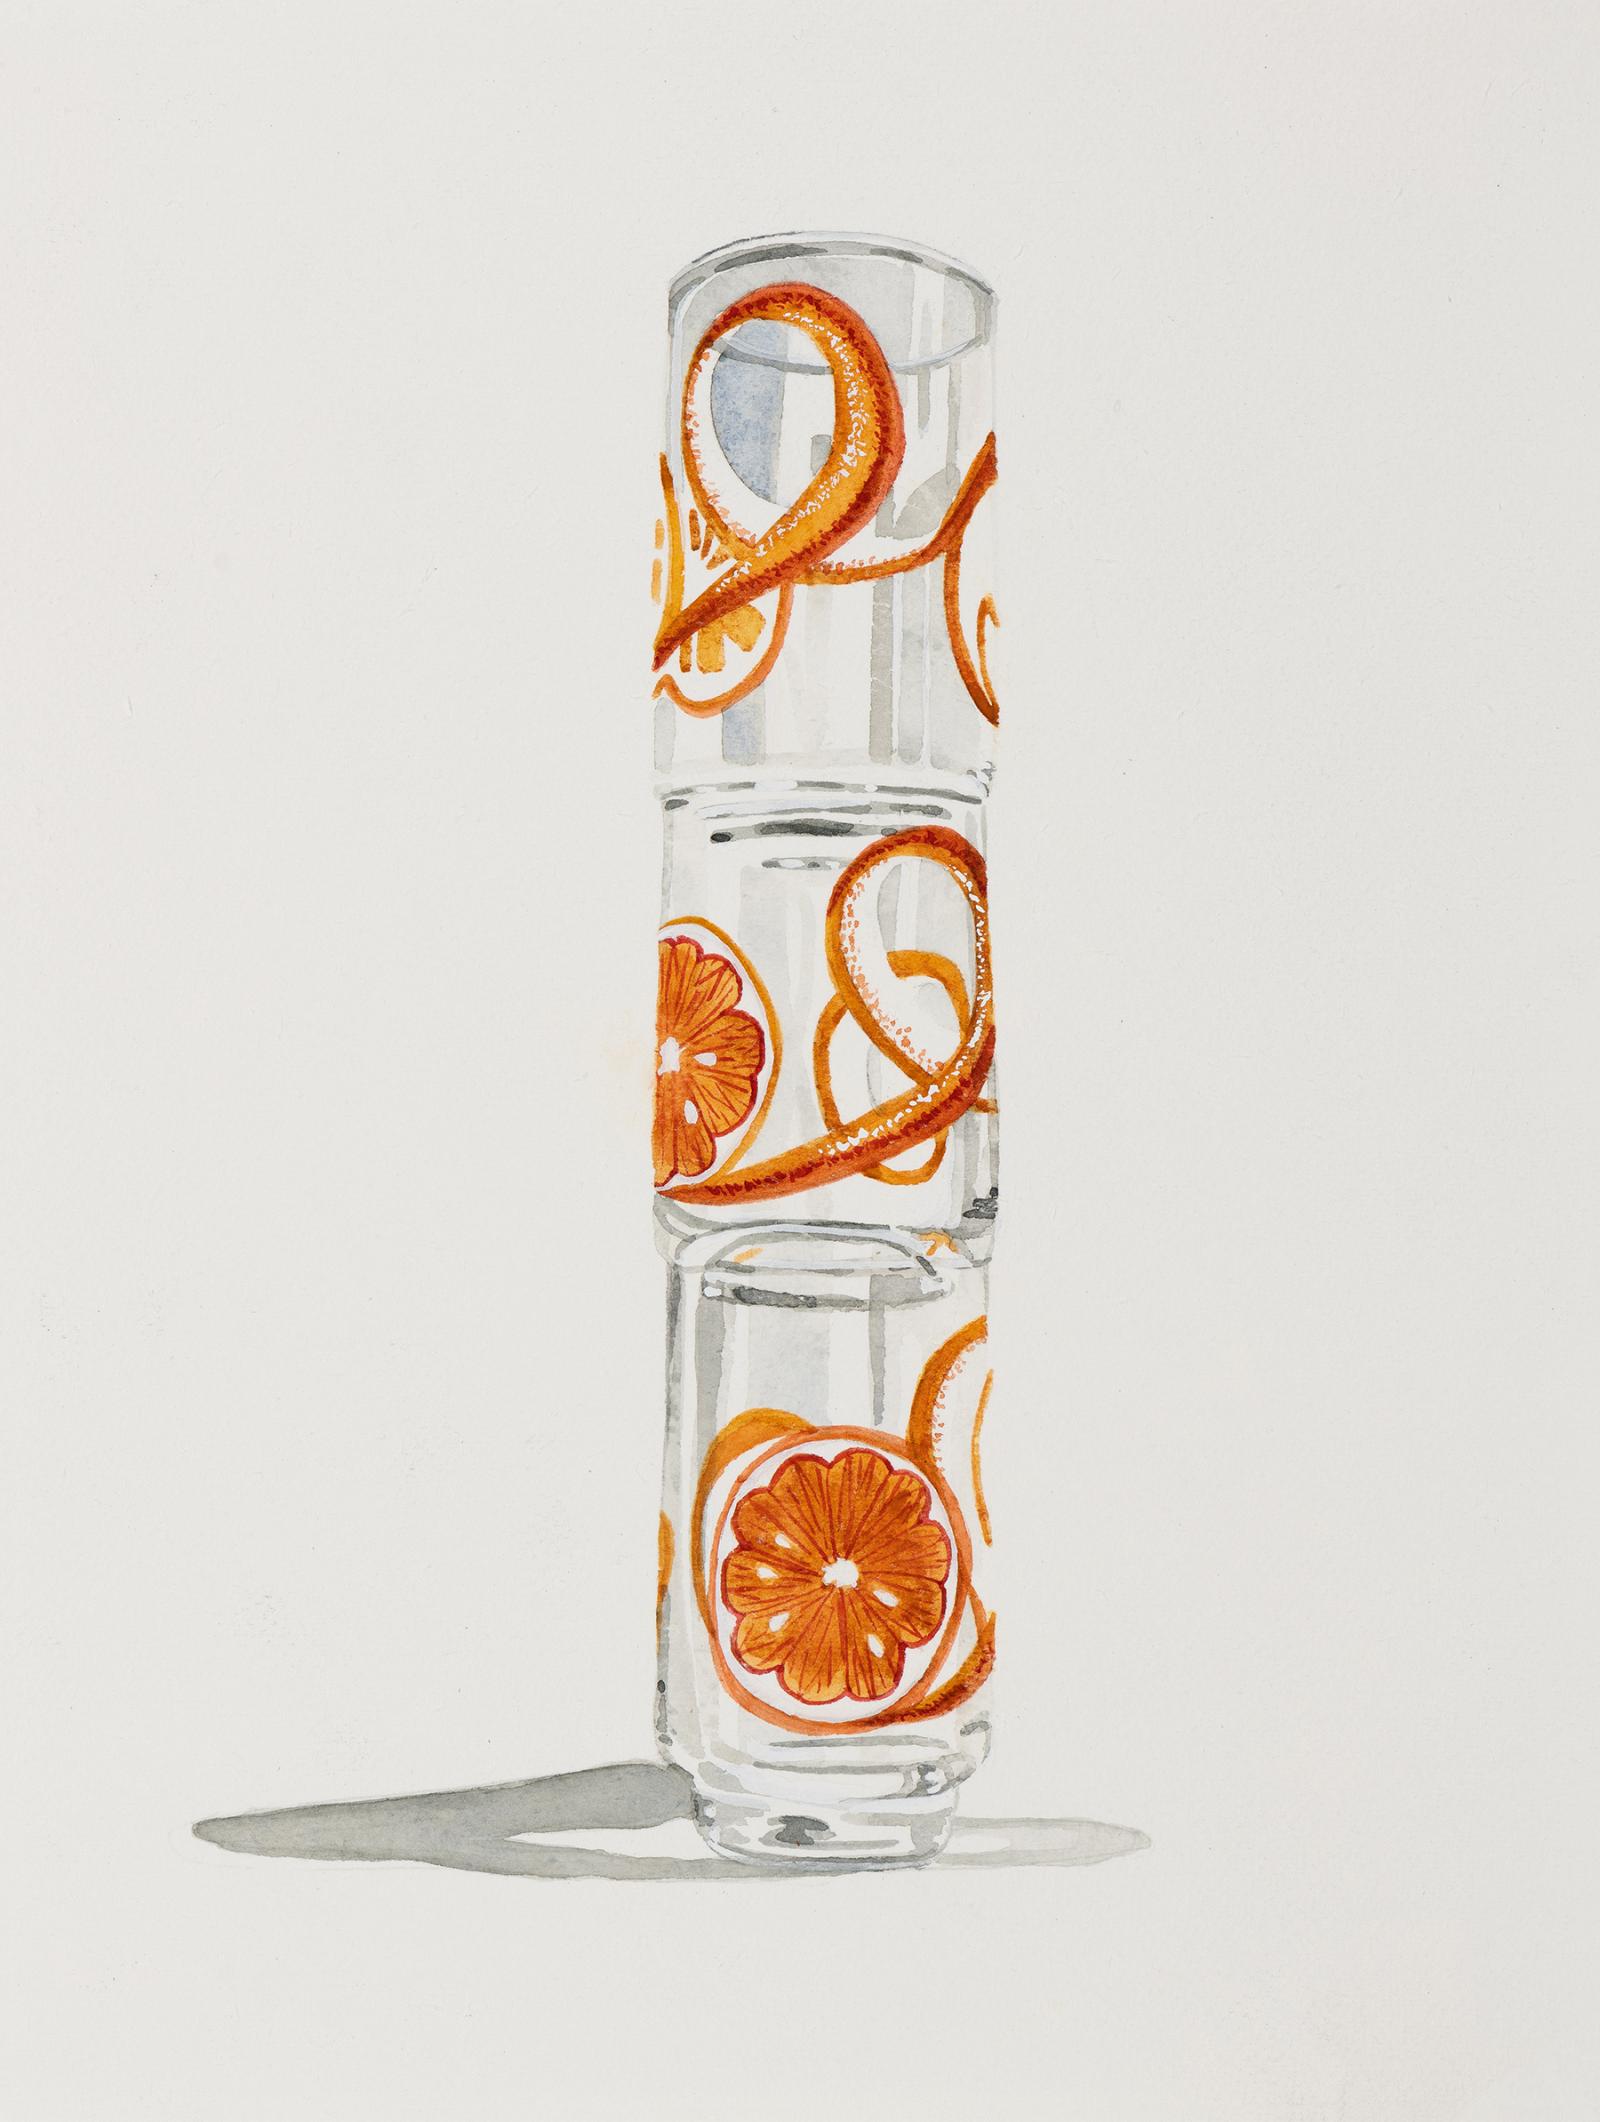 A staple of American households from the 1940s onward, the orange juice glasses depicted in this watercolor series were sold in so-called “Hostess sets” that typically included a carafe or pitcher and six to eight glasses. Priced cheaply for everyday use, they sold in the millions with the two major midcentury manufacturers, Libbey based in Massachusetts, and Anchor Hocking based in Ohio, duking it out for market share. Atypical for the time and still in production today, Libbey’s whimsical designs were the byproduct of the Jewish female design team of Freda Diamond and Virginia Hamill. Diamond, who stayed at the company until the mid-1980s was recorded in a 1954 Life magazine as having “probably done more to get simple, well-styled furnishings into every room of the average U.S. home than any other designer.”

Today, the majority of these sets are incomplete and sold in antiques malls and thrift shops. The photographs these paintings are based on were found on Ebay and other resale websites, where lots of midcentury enthusiasts buy whatever remains they can find of this period of design.